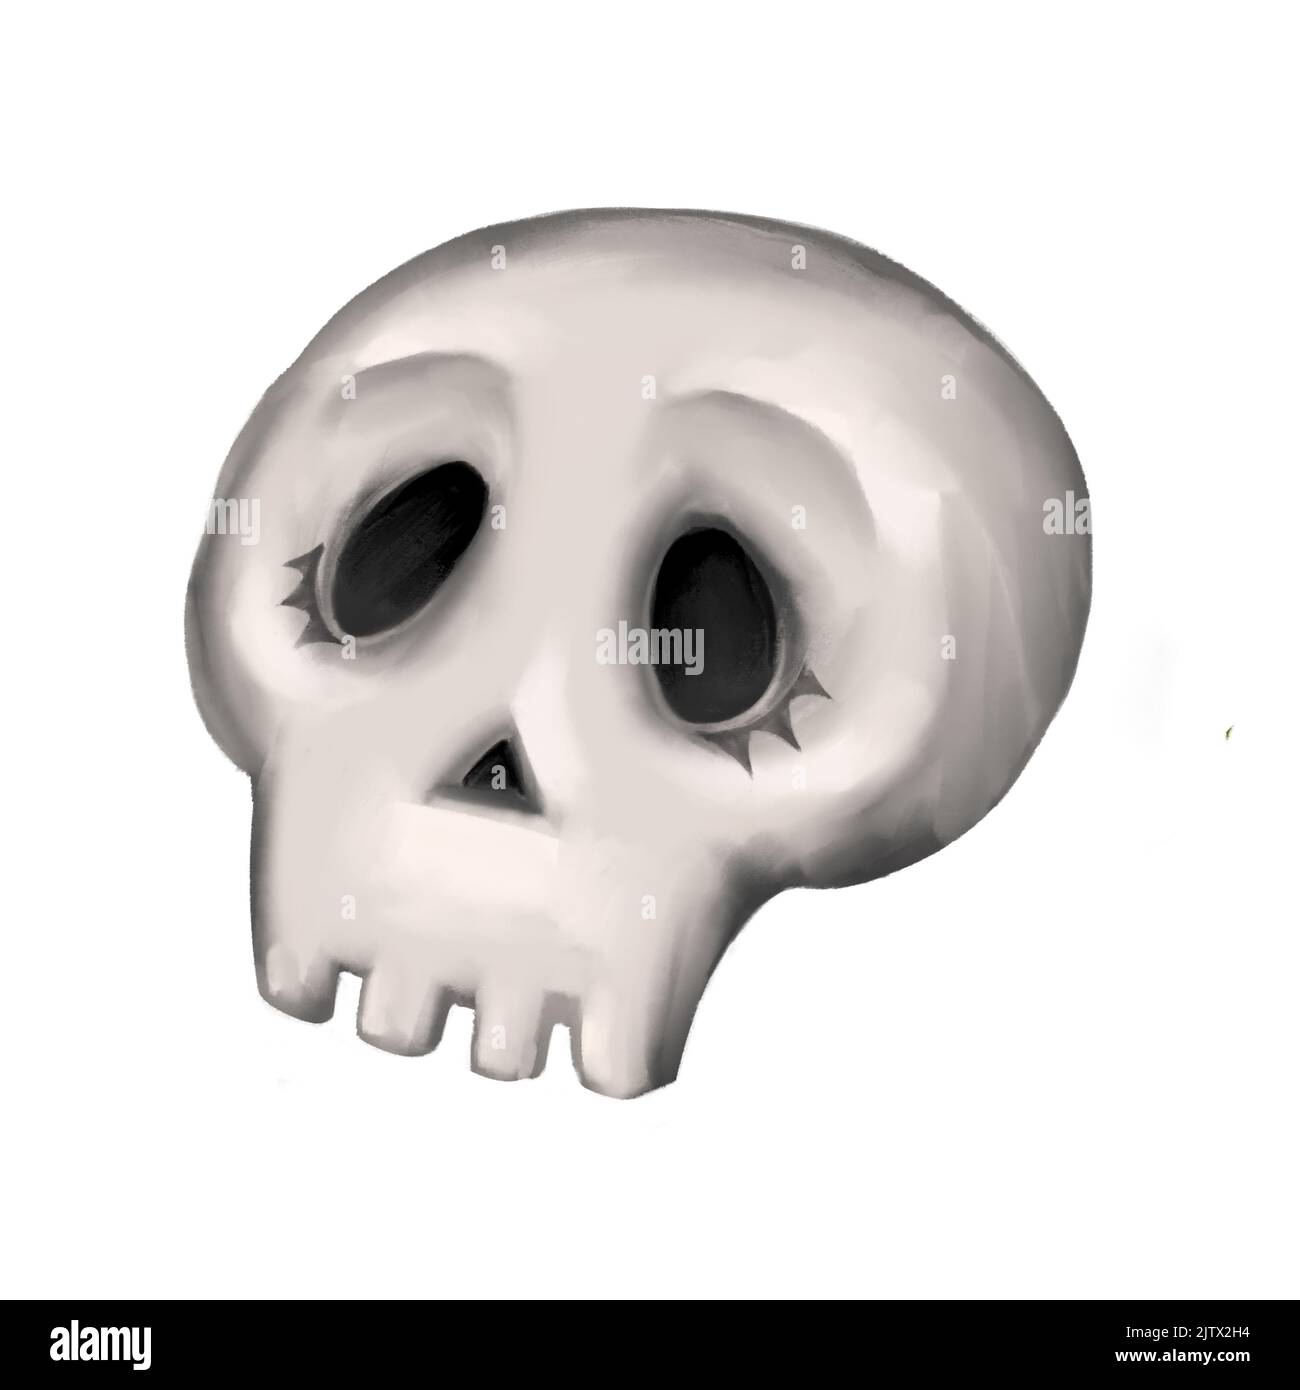 Cute scull, isolated on white background, suitable for halloween decorations. Stock Photo